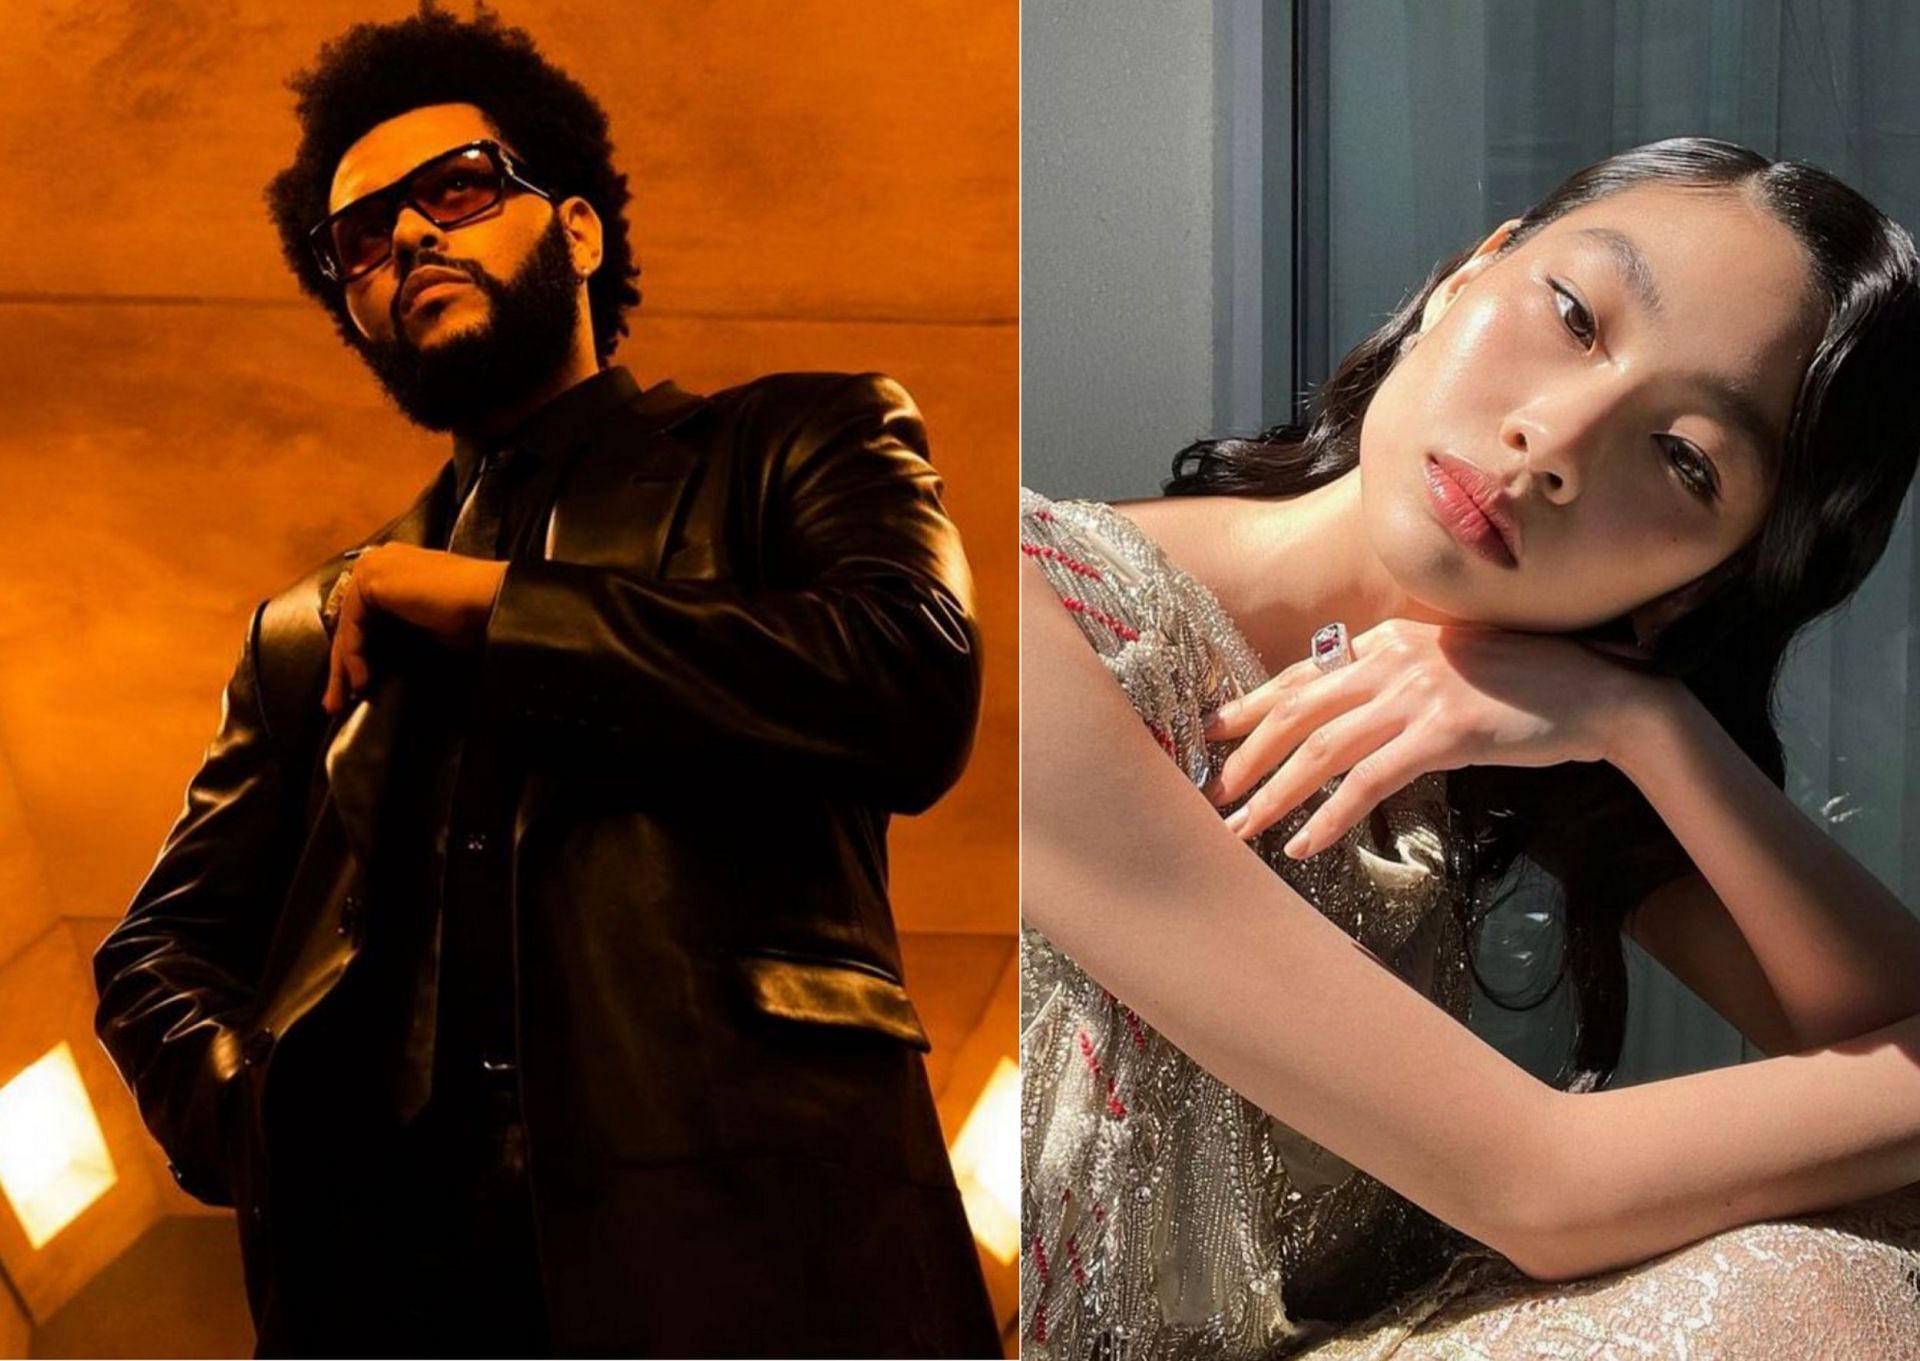 The Weeknd's 'Out of Time' Video Stars Jim Carrey, HoYeon Jung